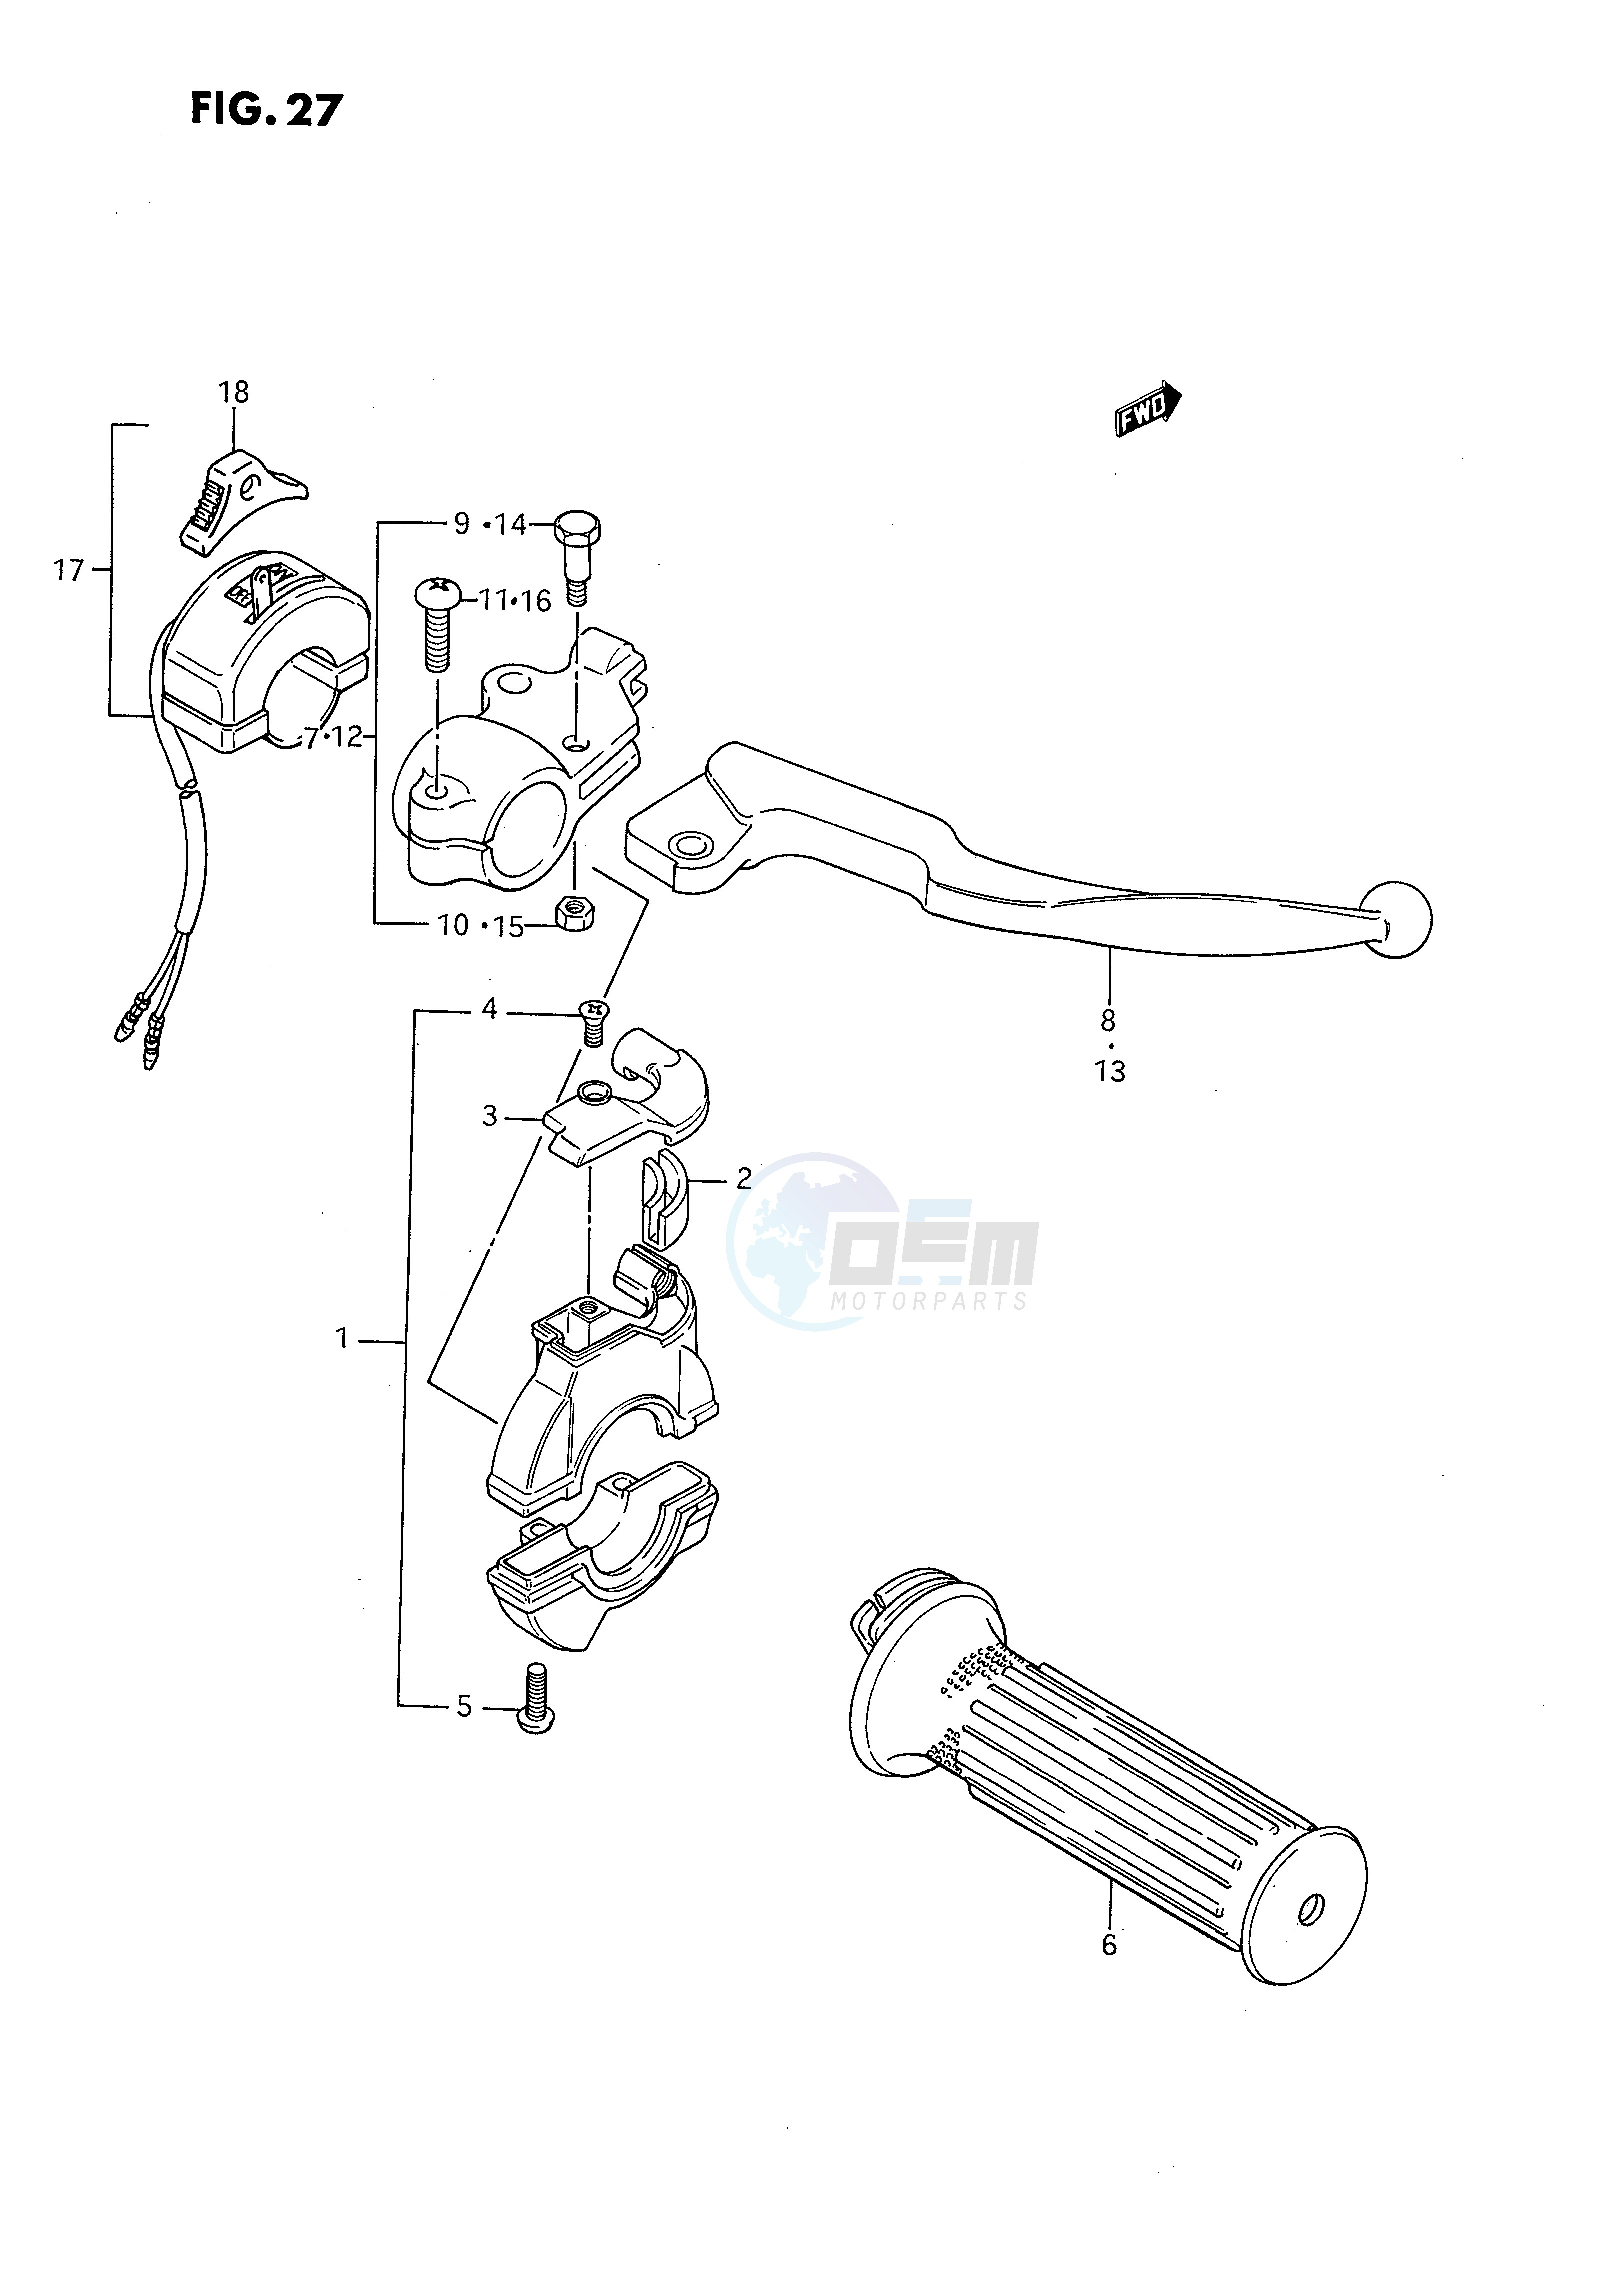 RIGHT HANDLE SWITCH blueprint